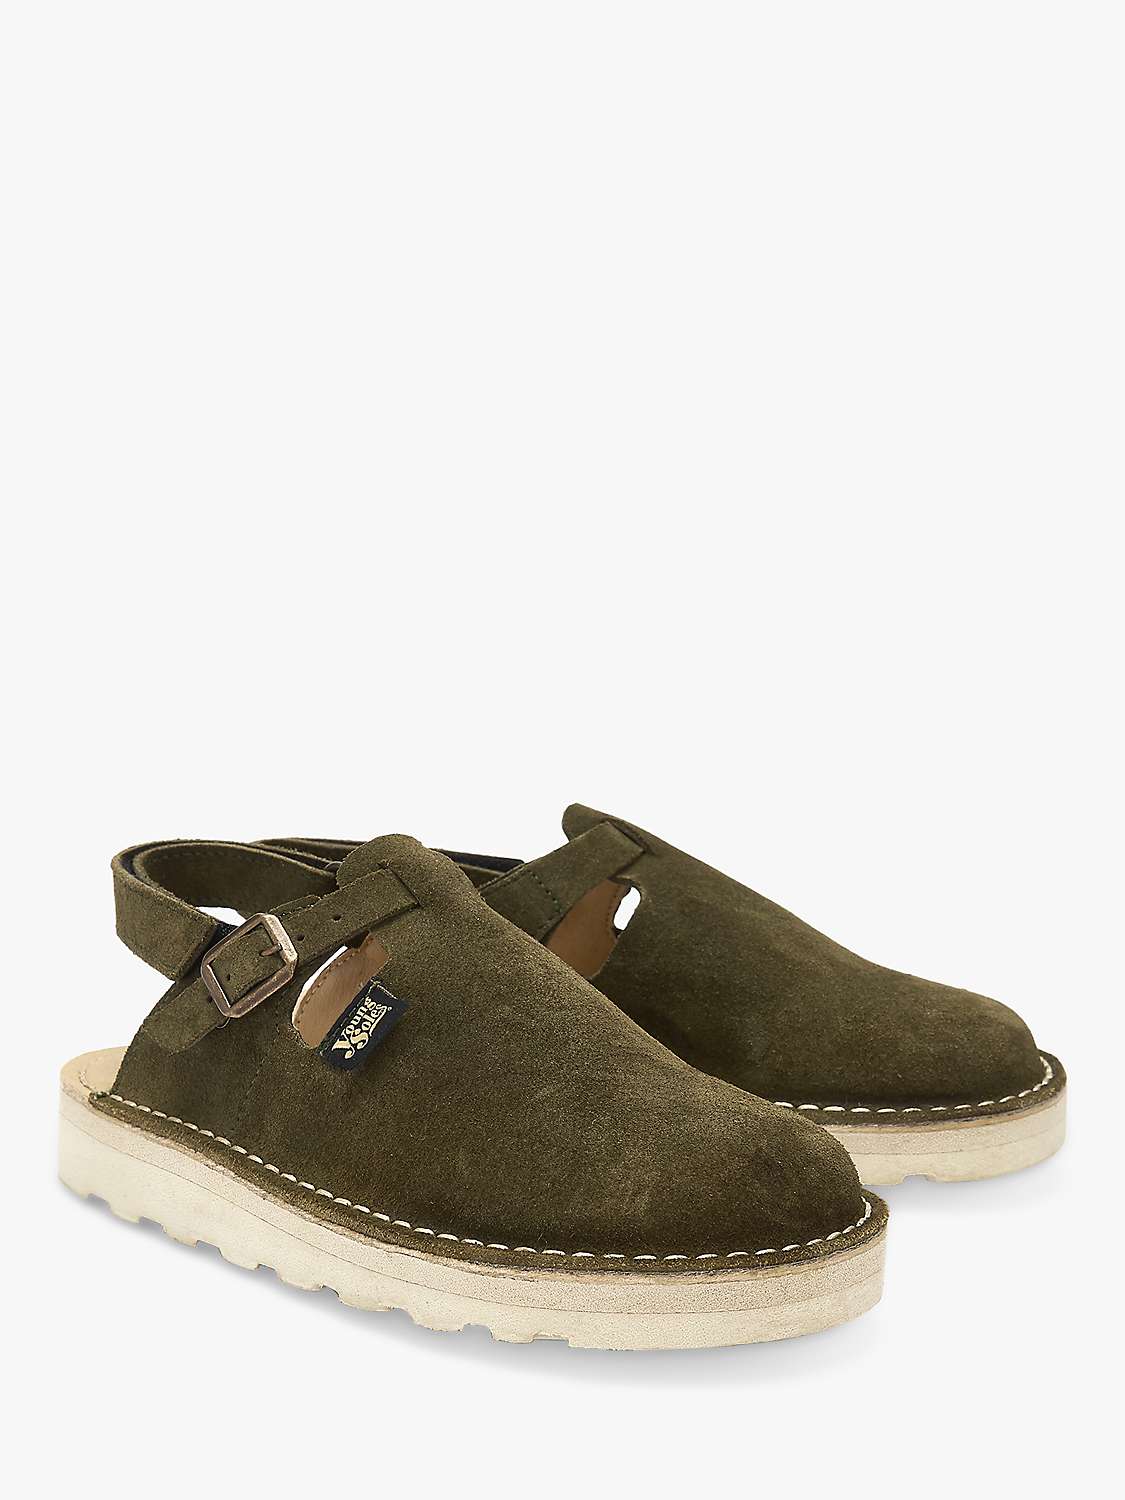 Buy Young Soles Kids' Heidi Suede Clogs Online at johnlewis.com